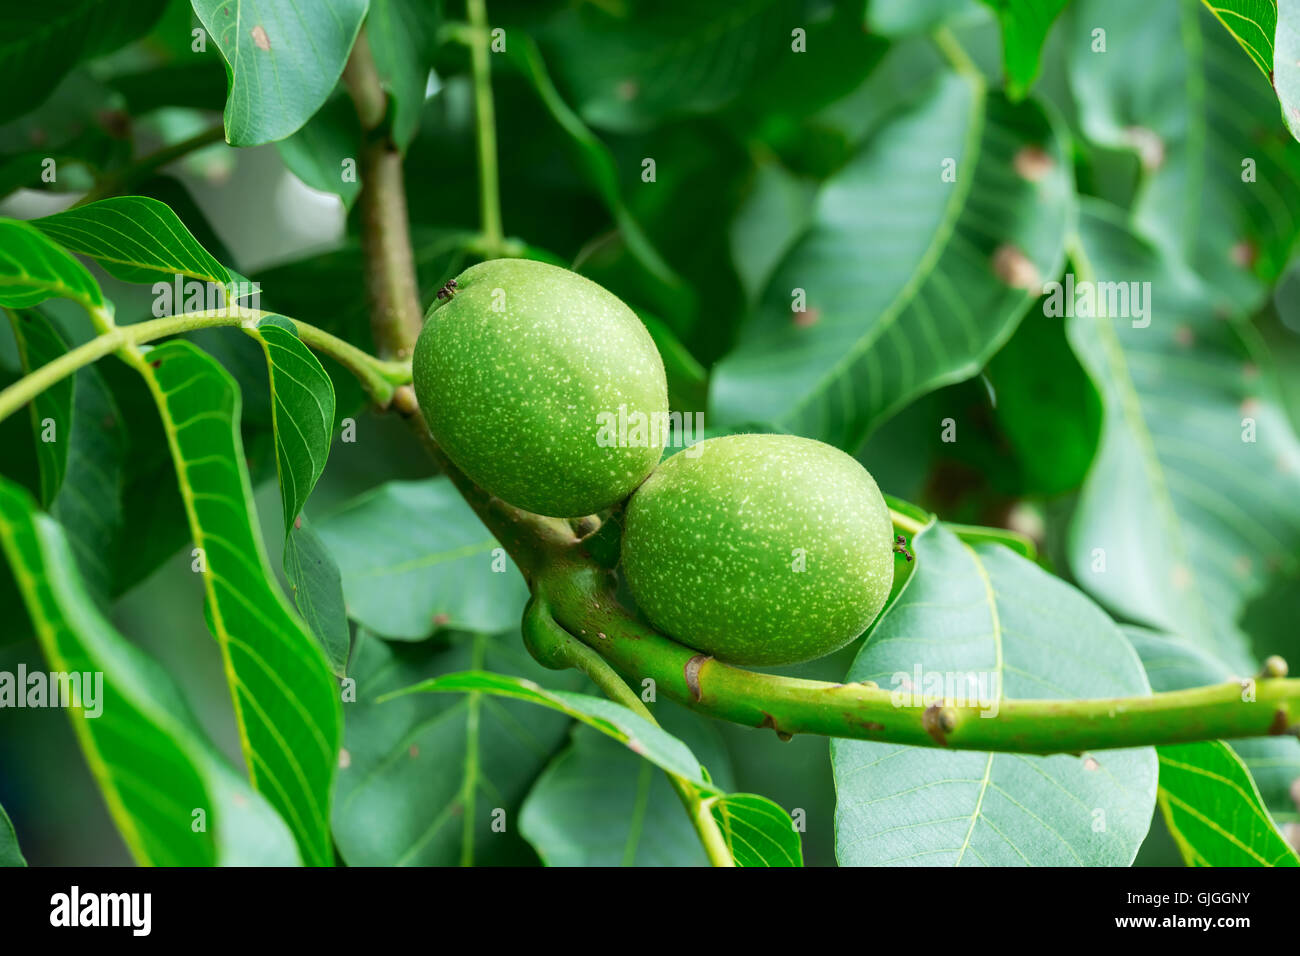 Young walnuts in green shell on a tree Stock Photo